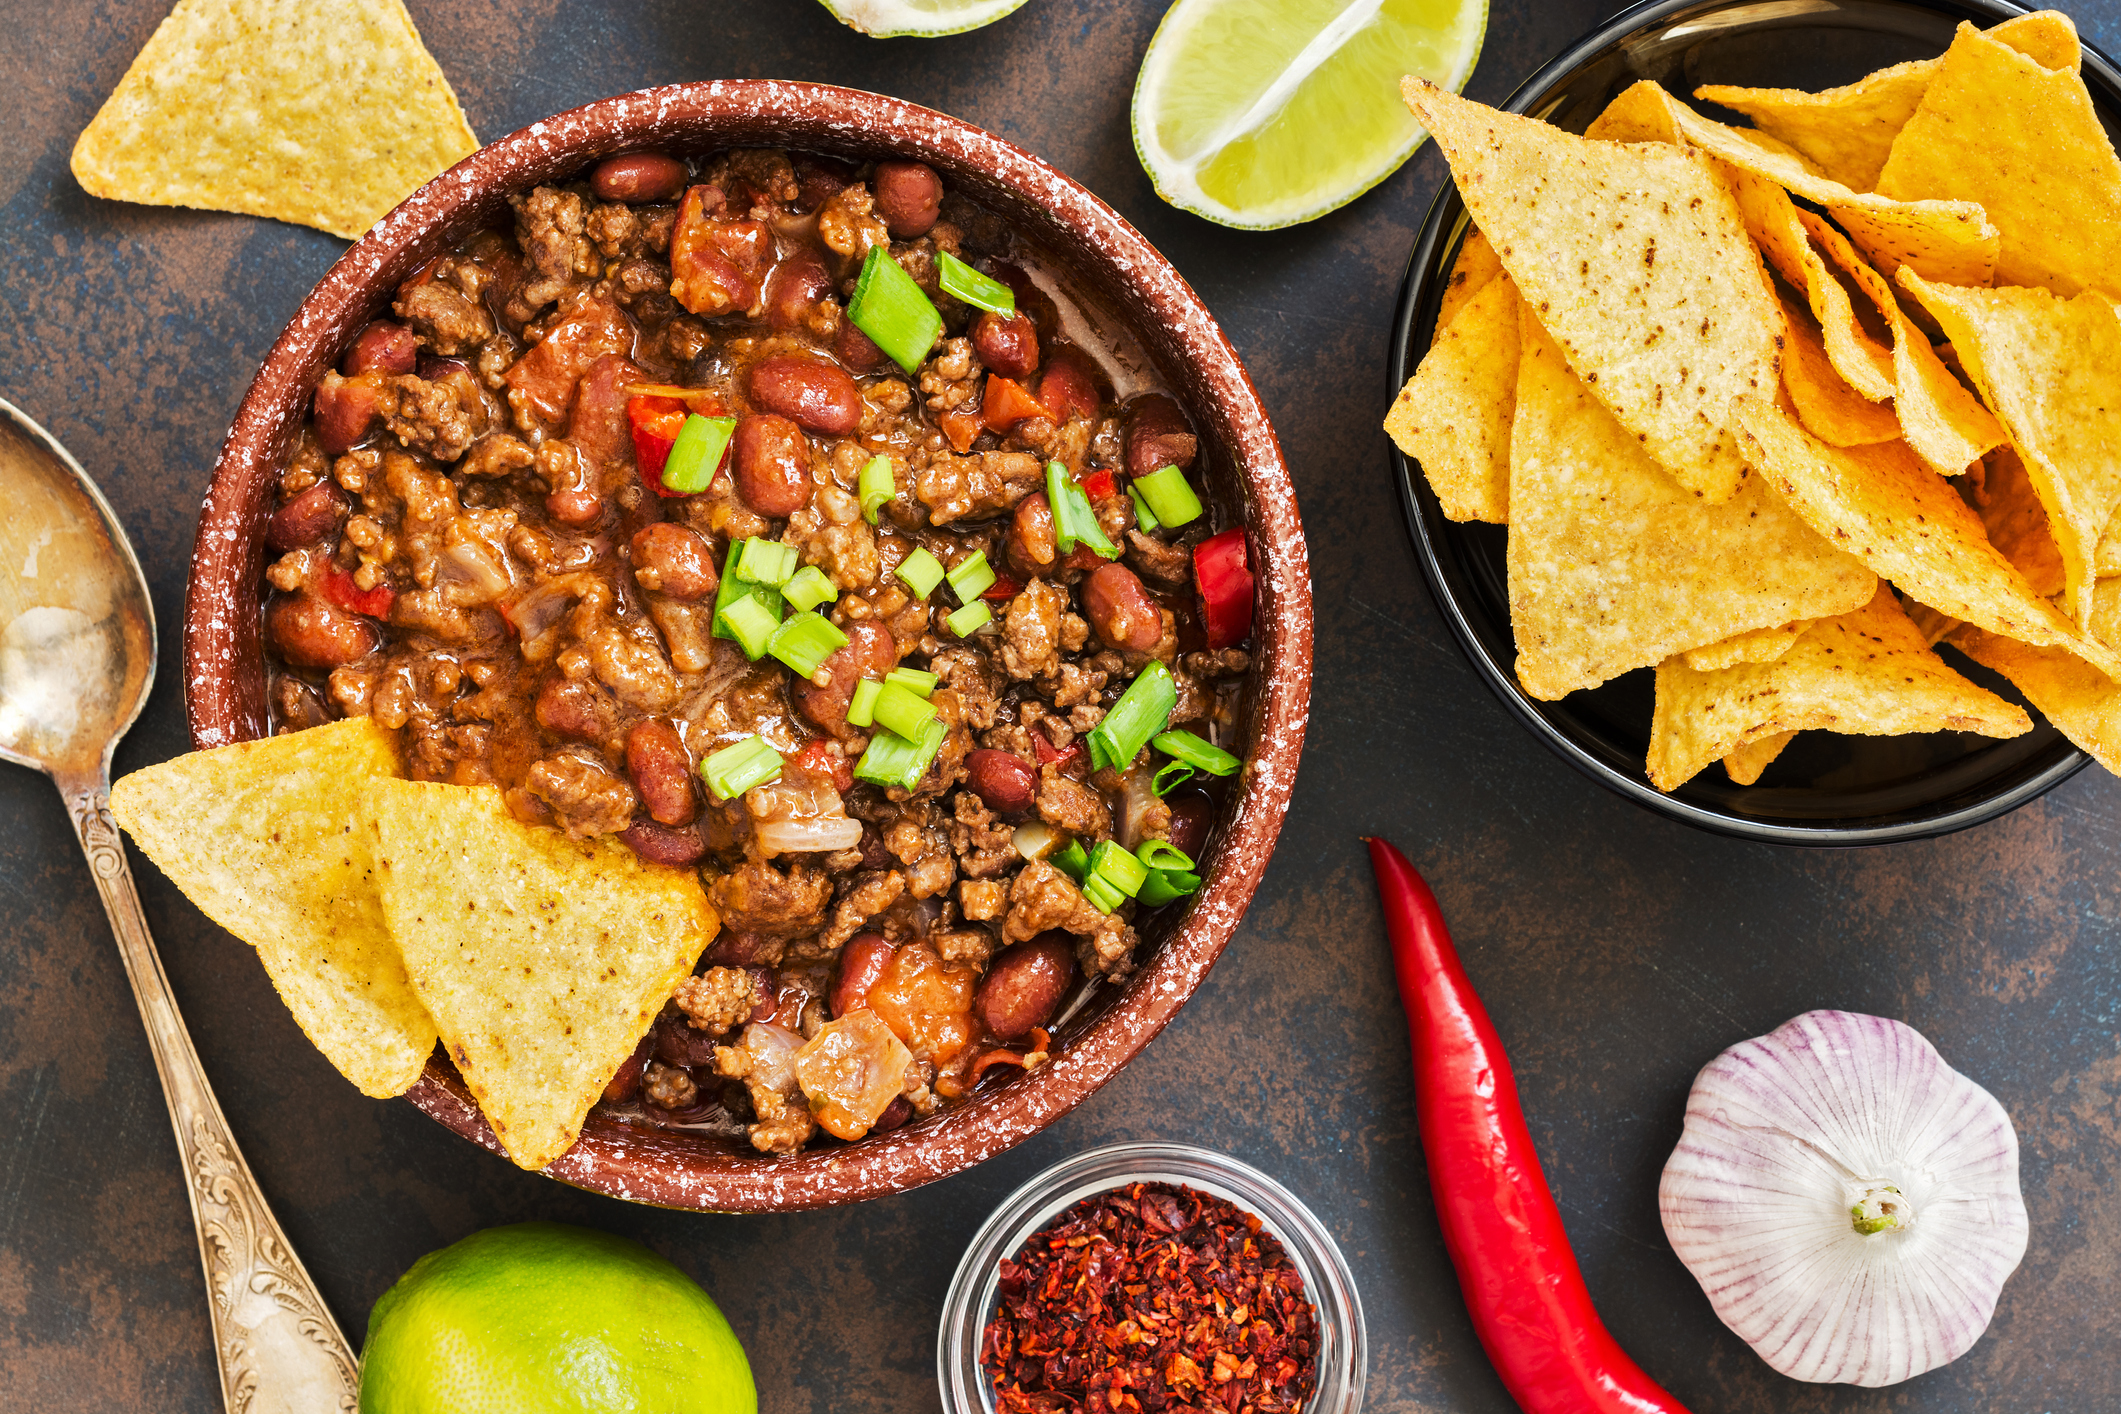 national-chili-day-2020-recipes-to-win-a-chili-cook-off-and-how-to